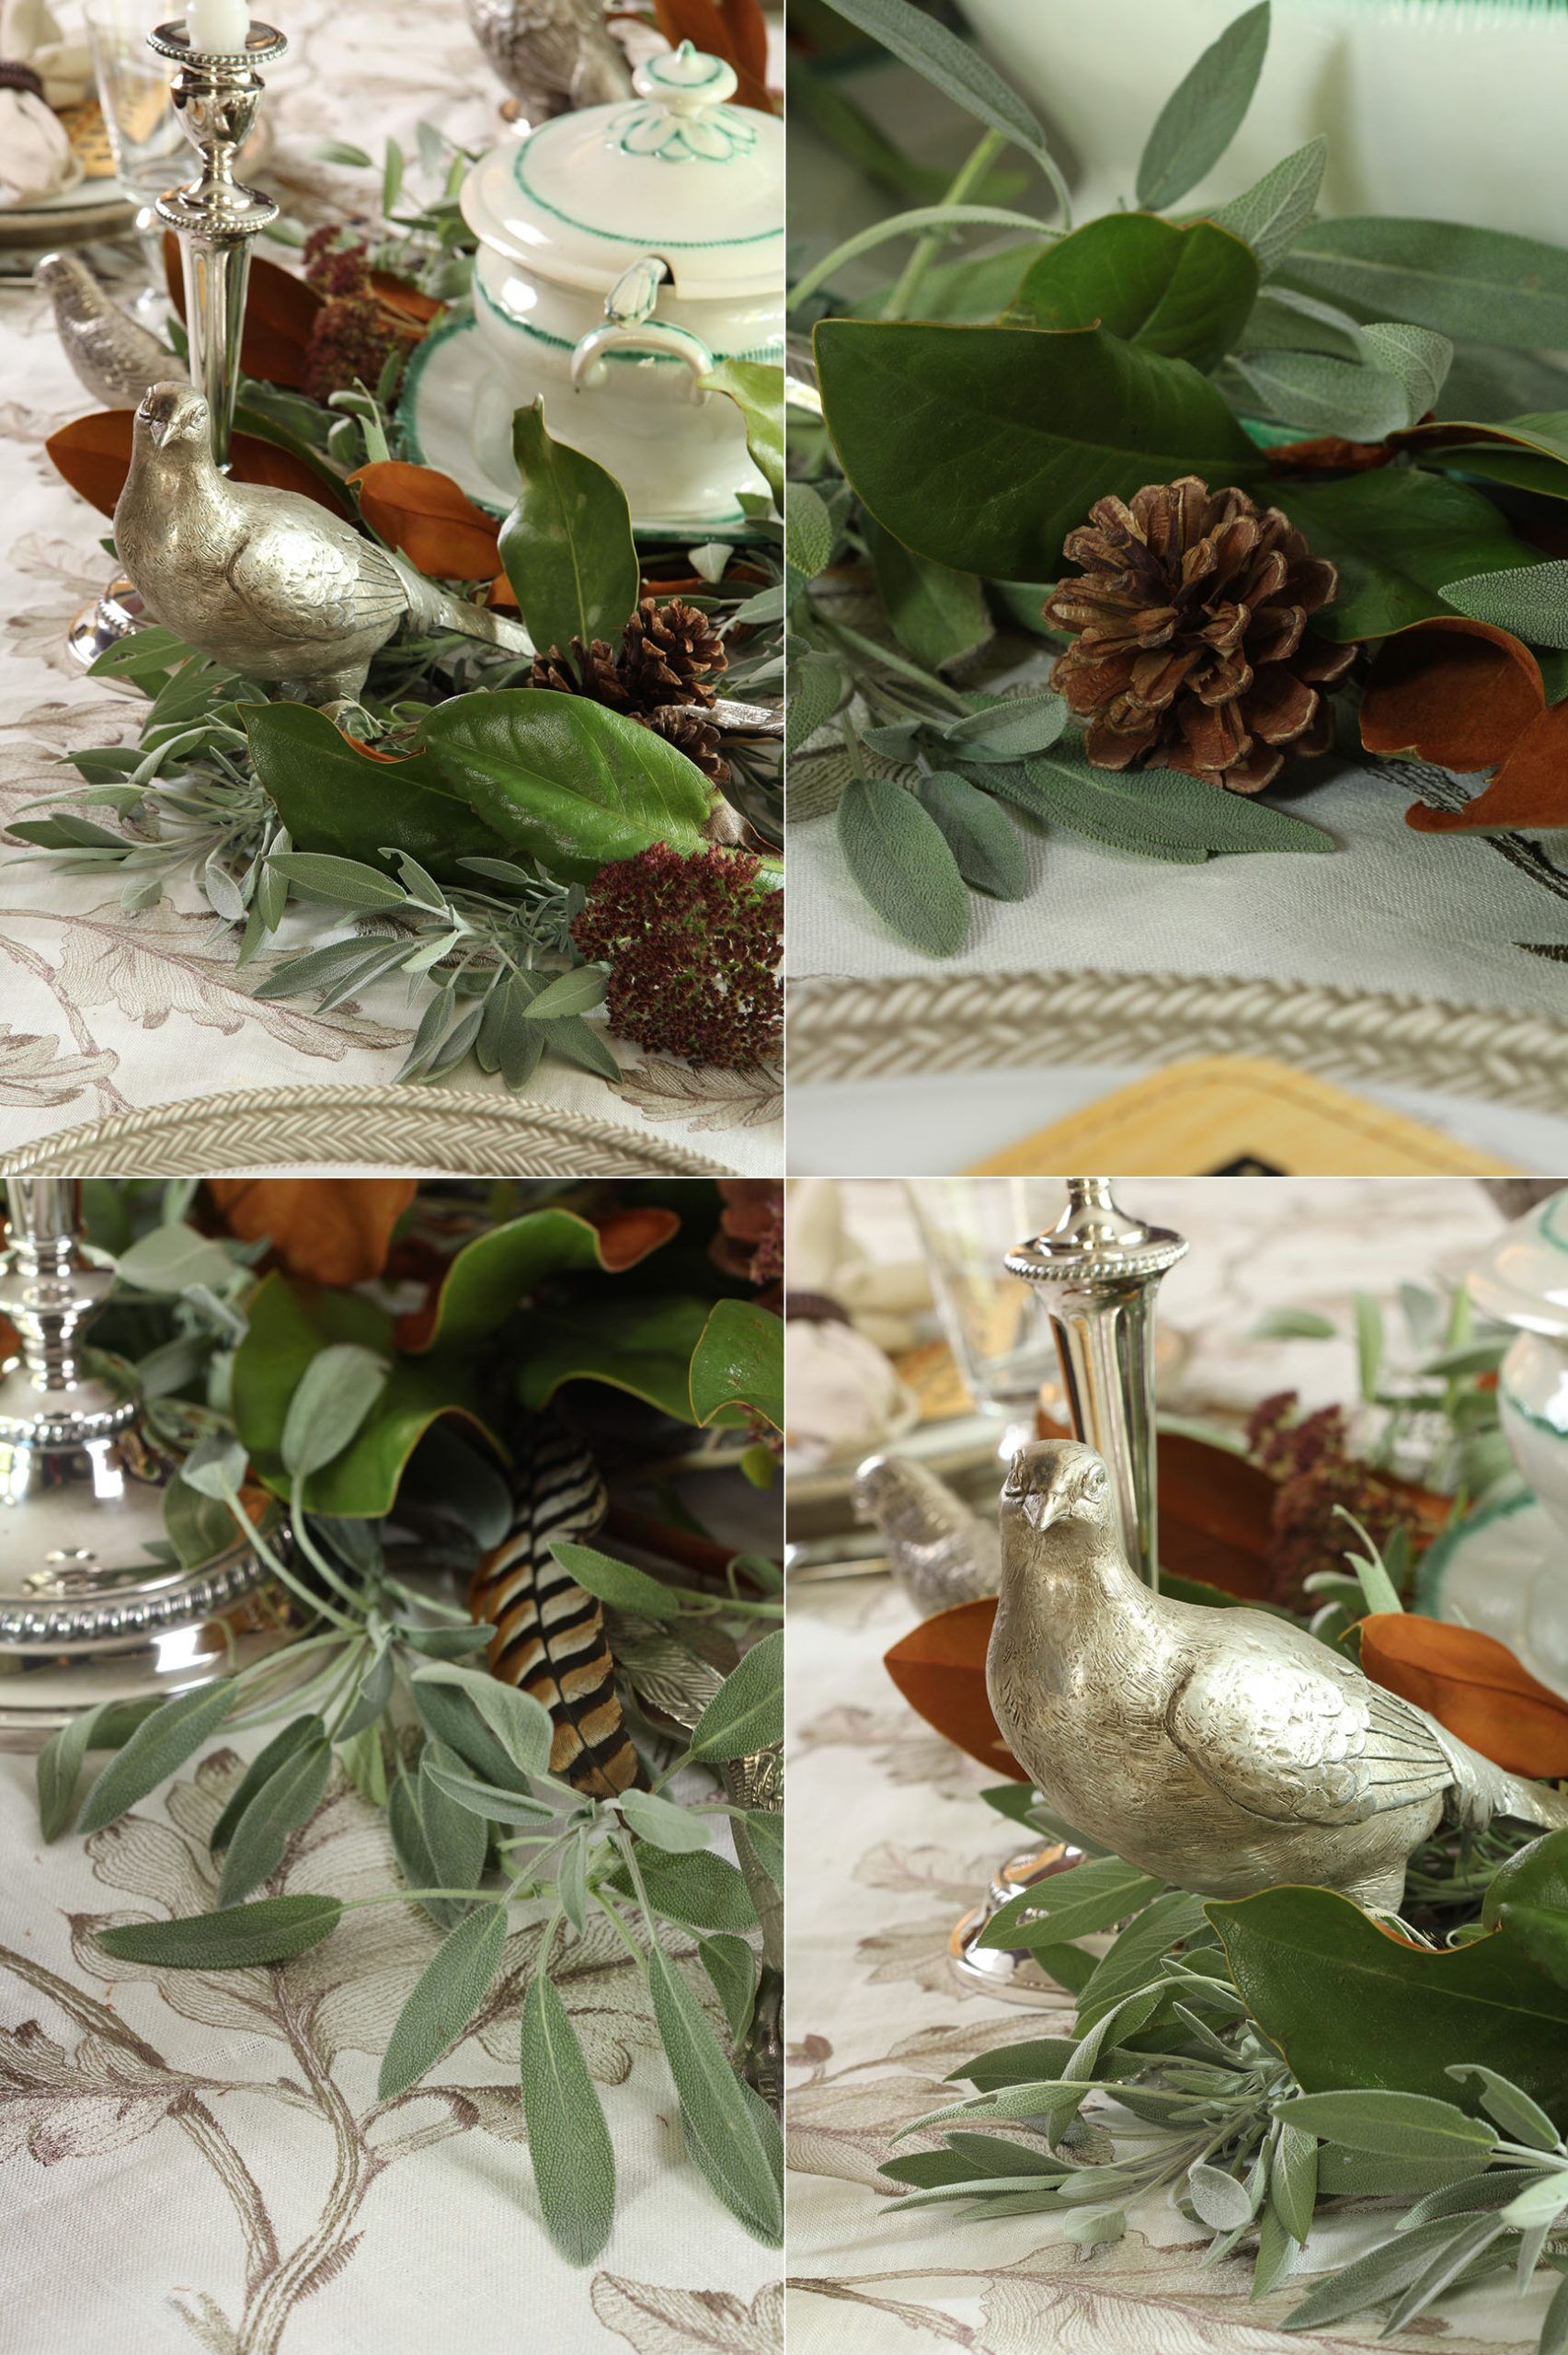 Need a little inspiration for your Thanksgiving table? Why not add some pretty greenery and some silver birds? A fresh and easy update.